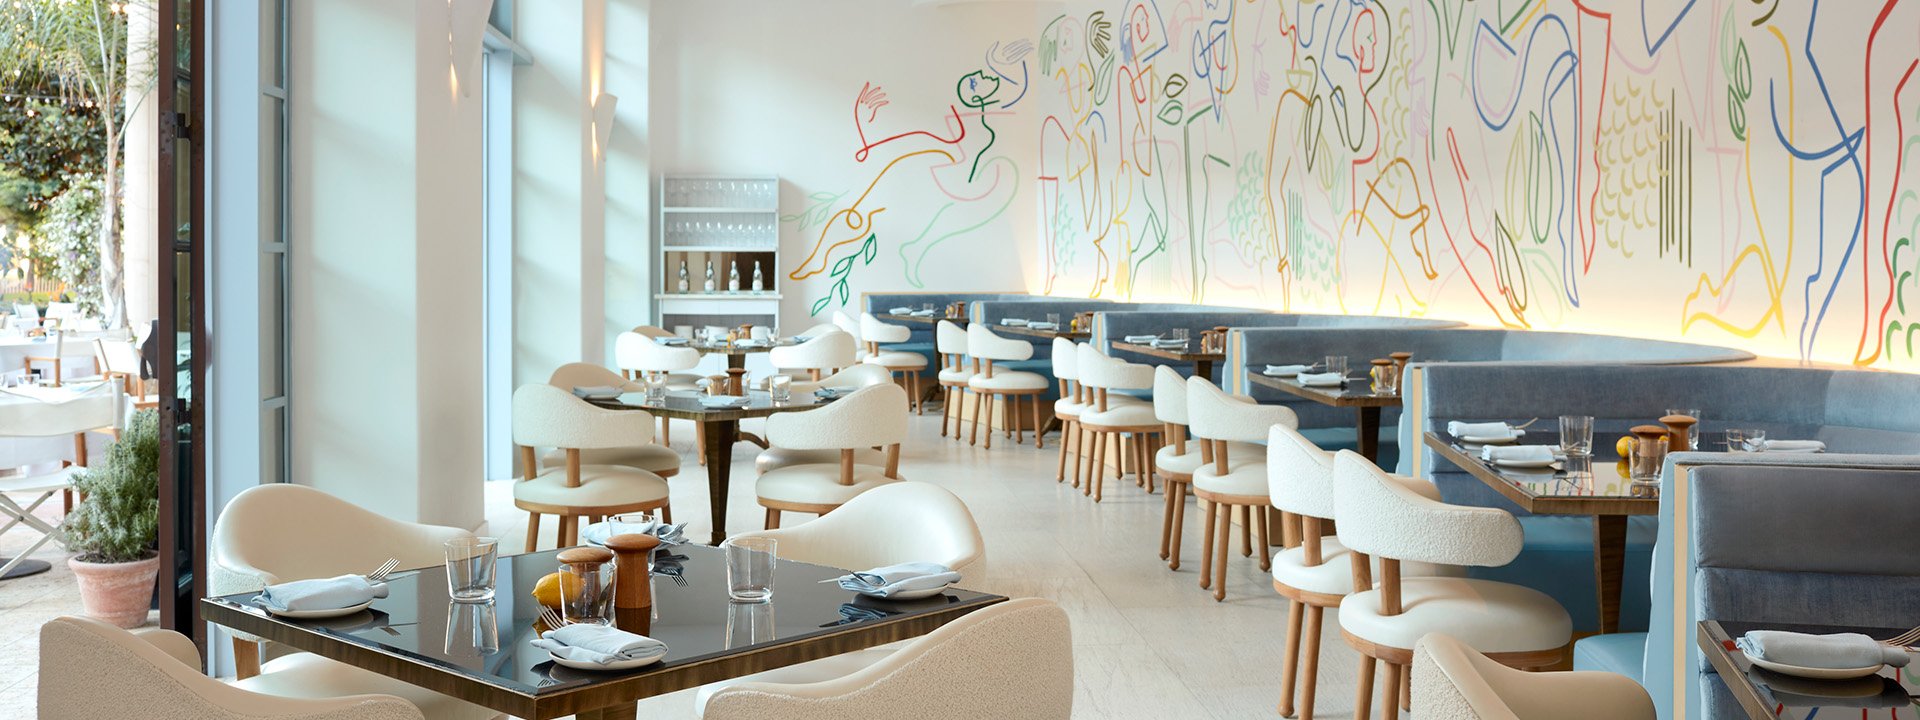 The restaurant's dining space showcases trendy decor with wall graffiti, enhancing its distinctive character.